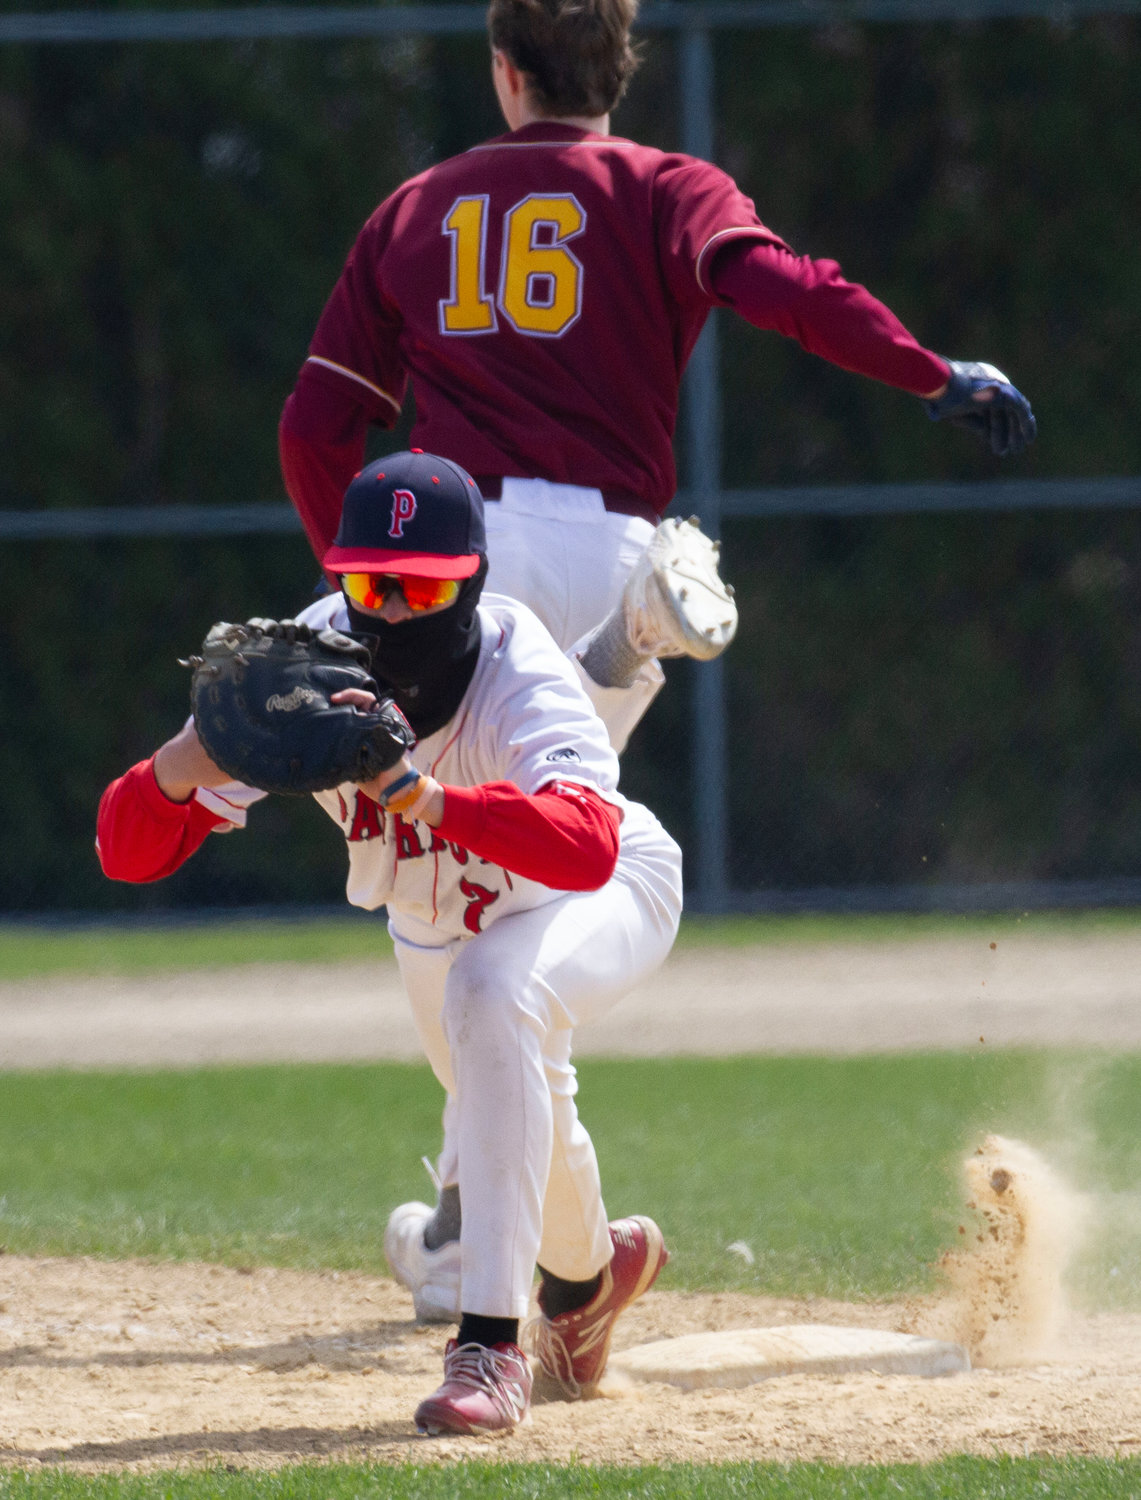 First baseman Cam Ruggieri makes a catch at first base for an out against Tiverton.